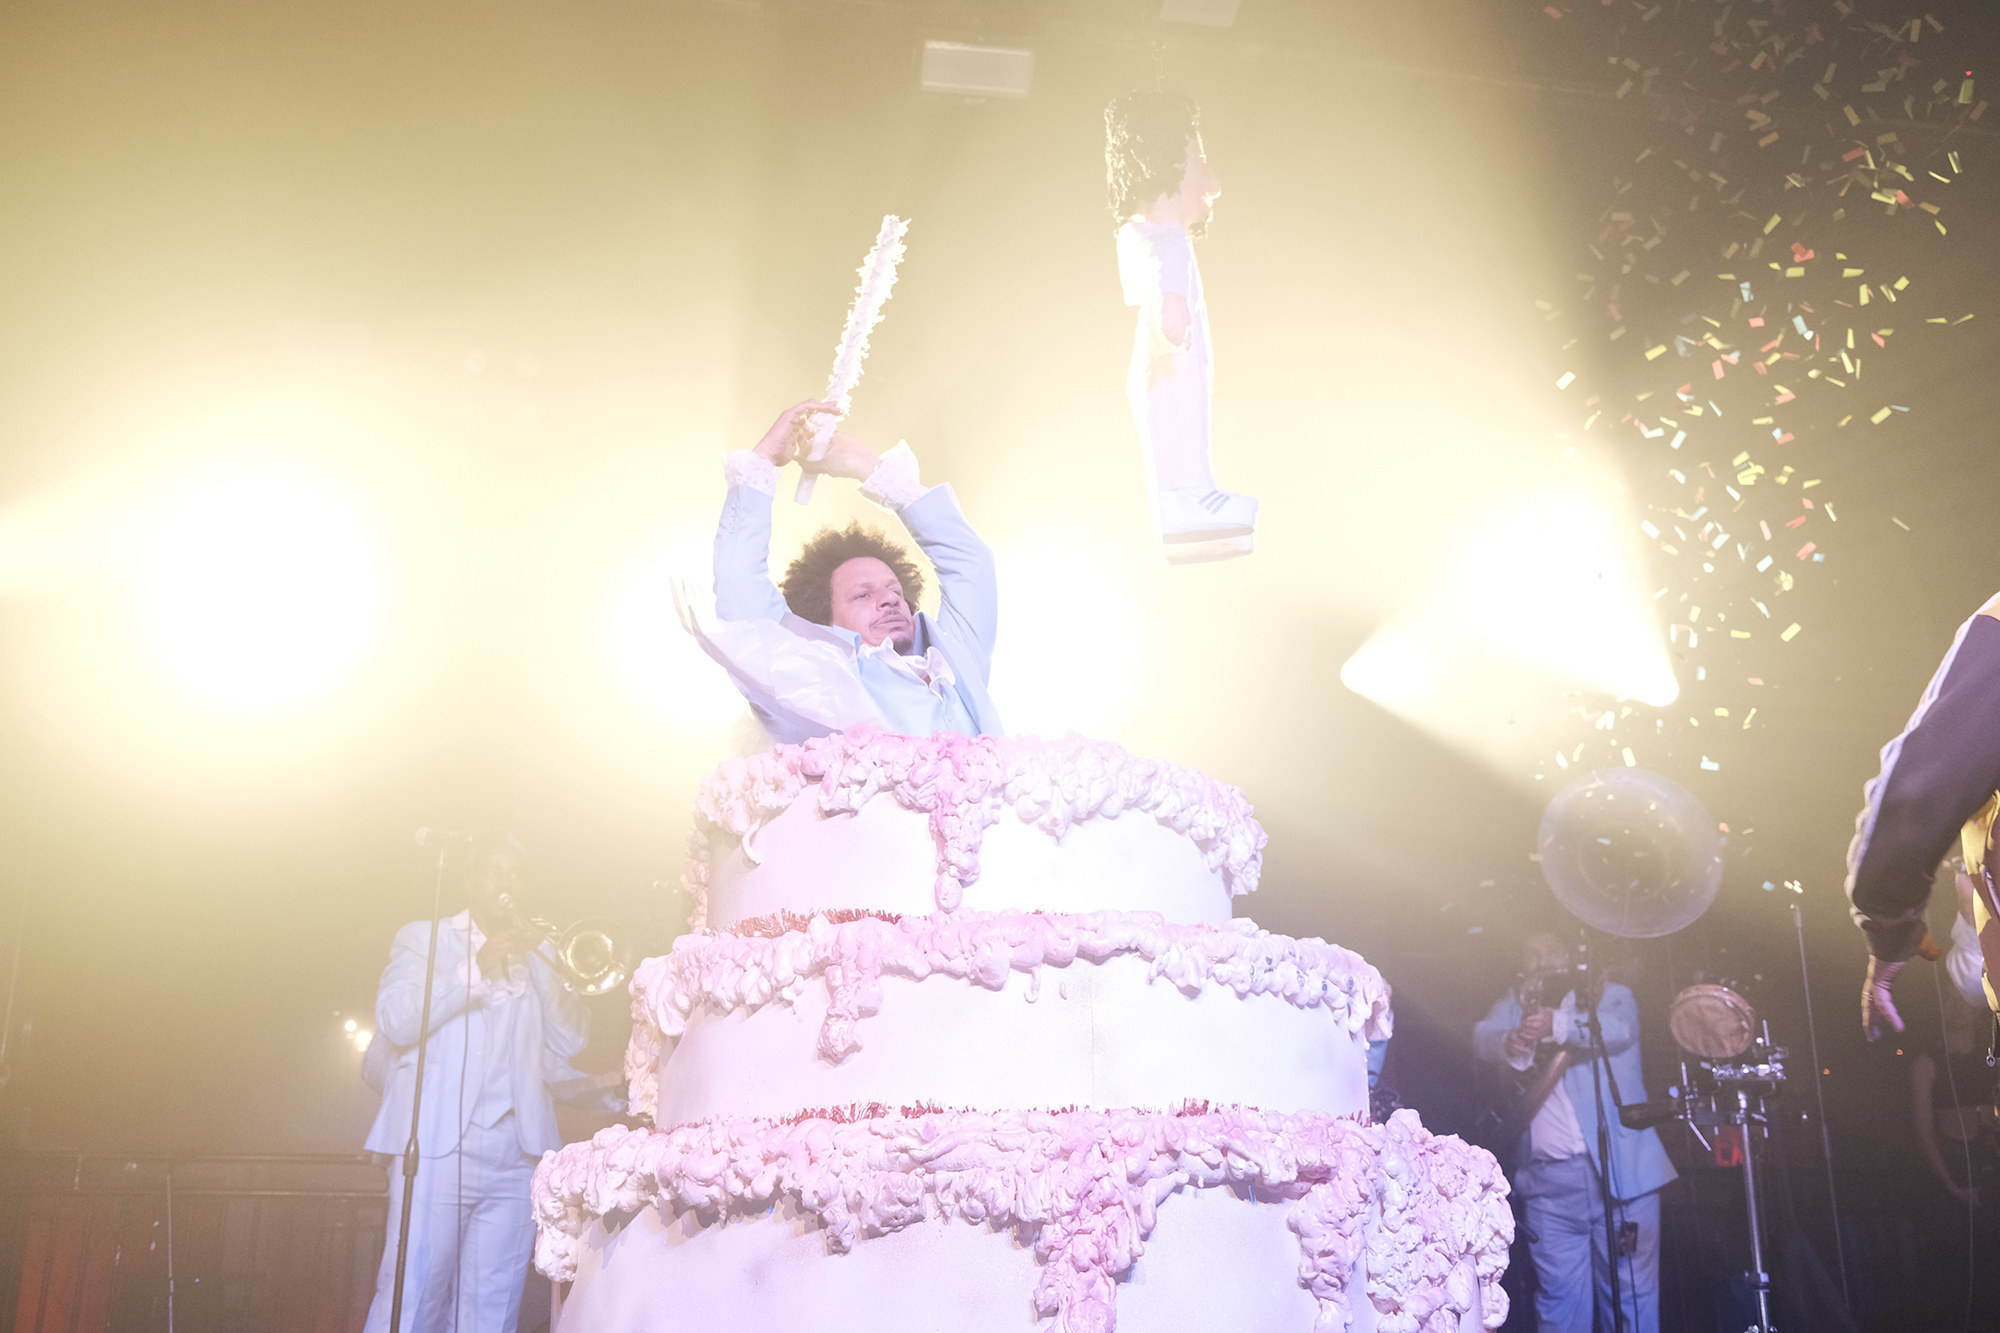 Eric André emerging with his arms raised from a gigantic pink cake